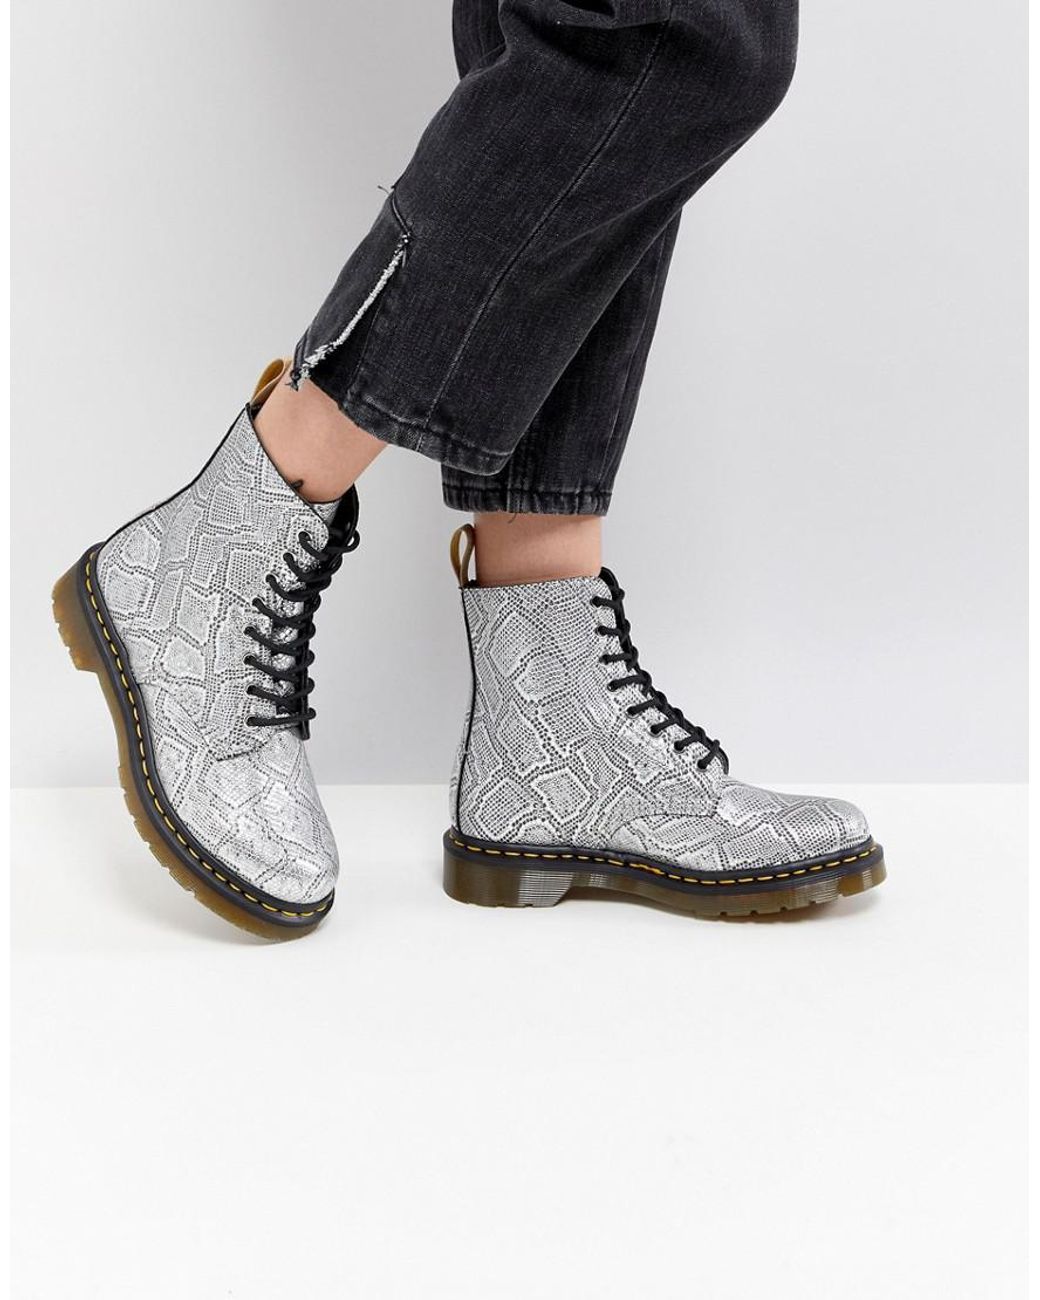 Dr. Martens Silver Snake Lace Up Boots in Metallic | Lyst